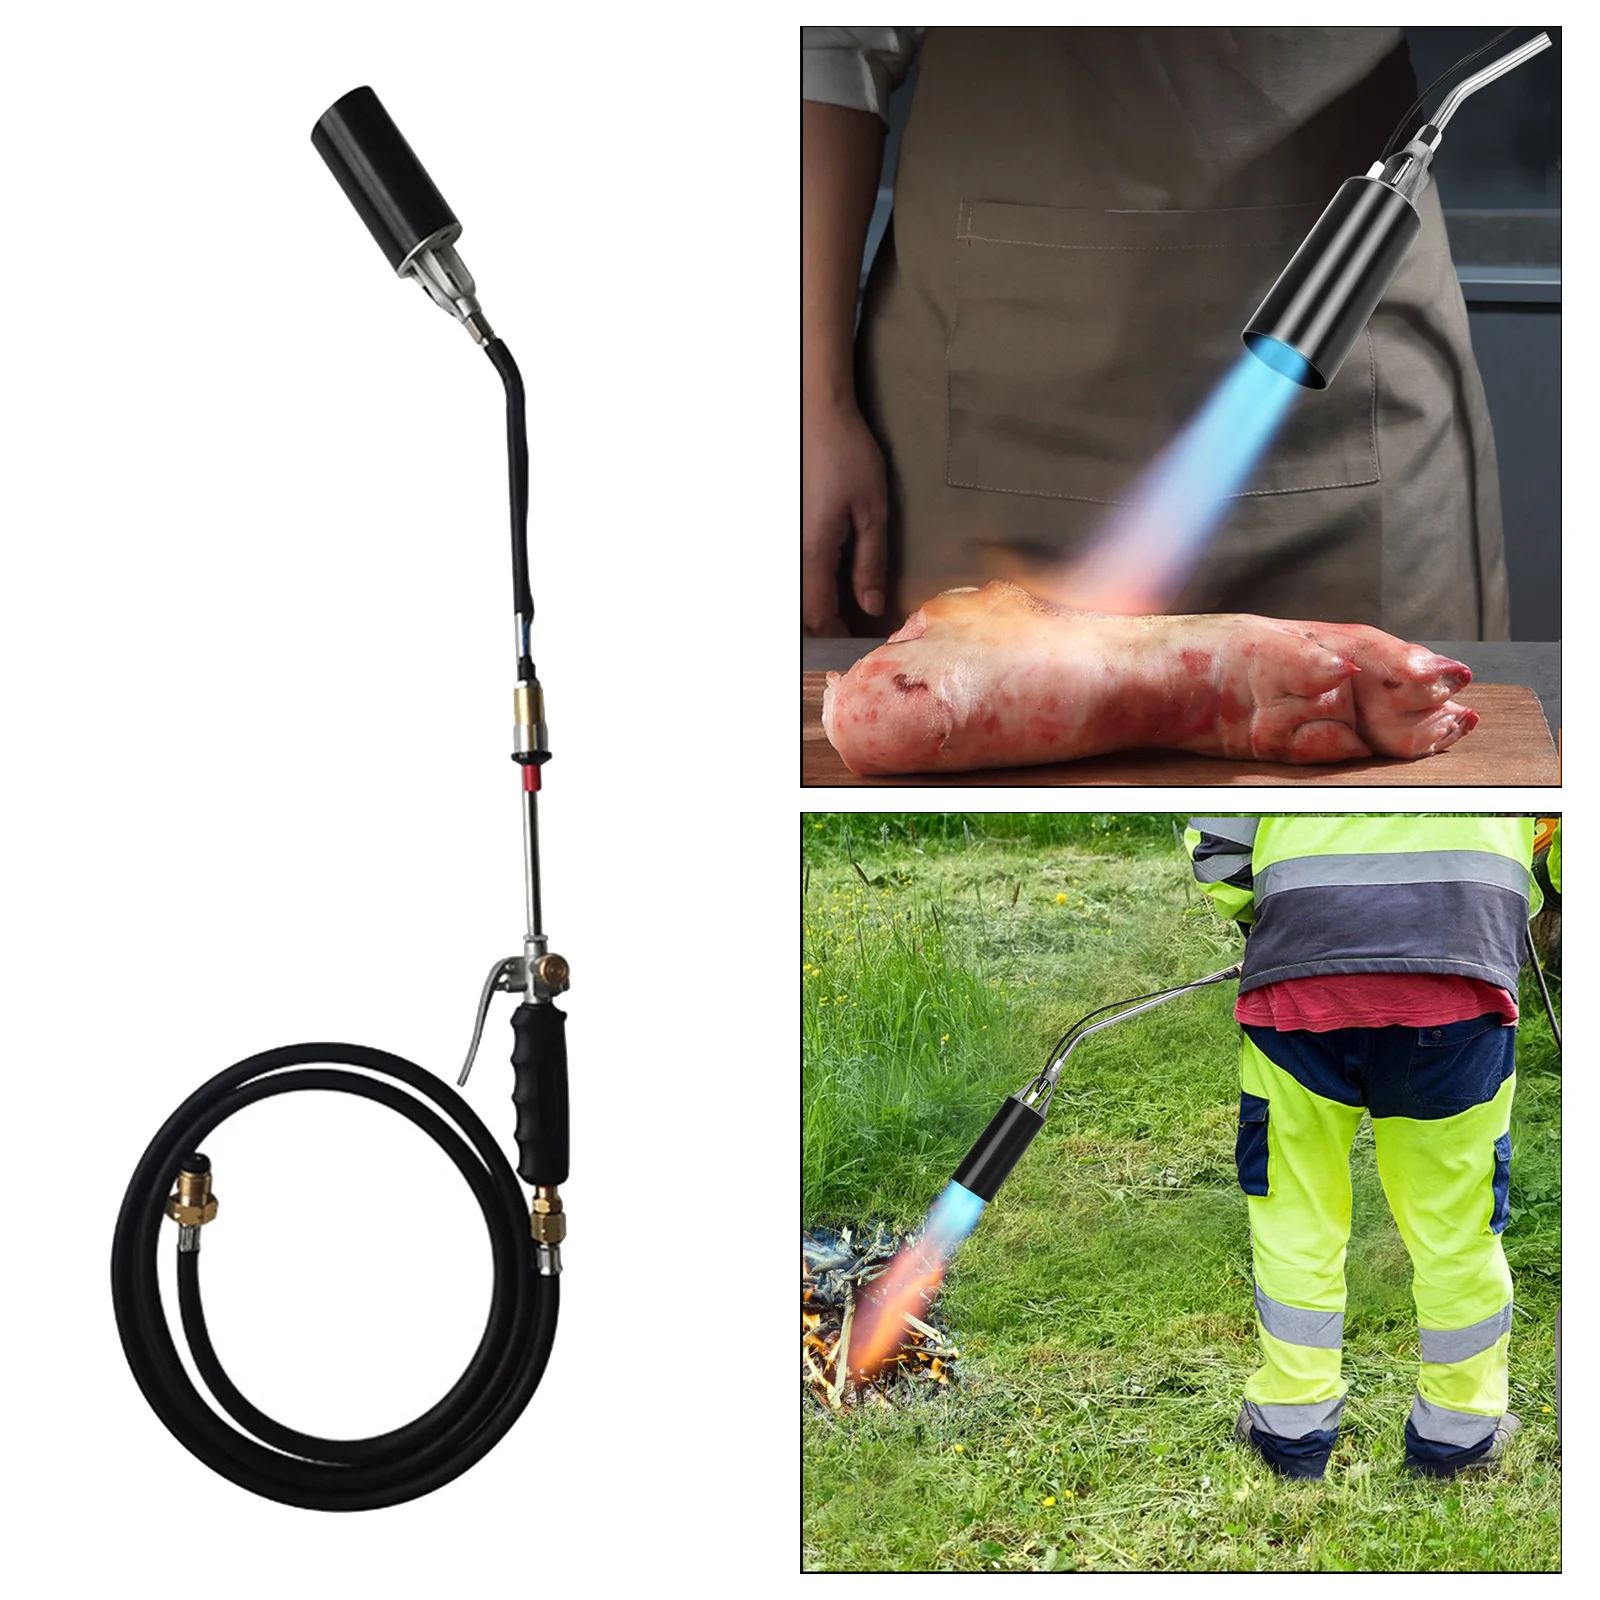 Thawing Pipes and Burning Weeds Black & Silver & Orange NewMultis Conventional Propane Torch for Melting Ice 